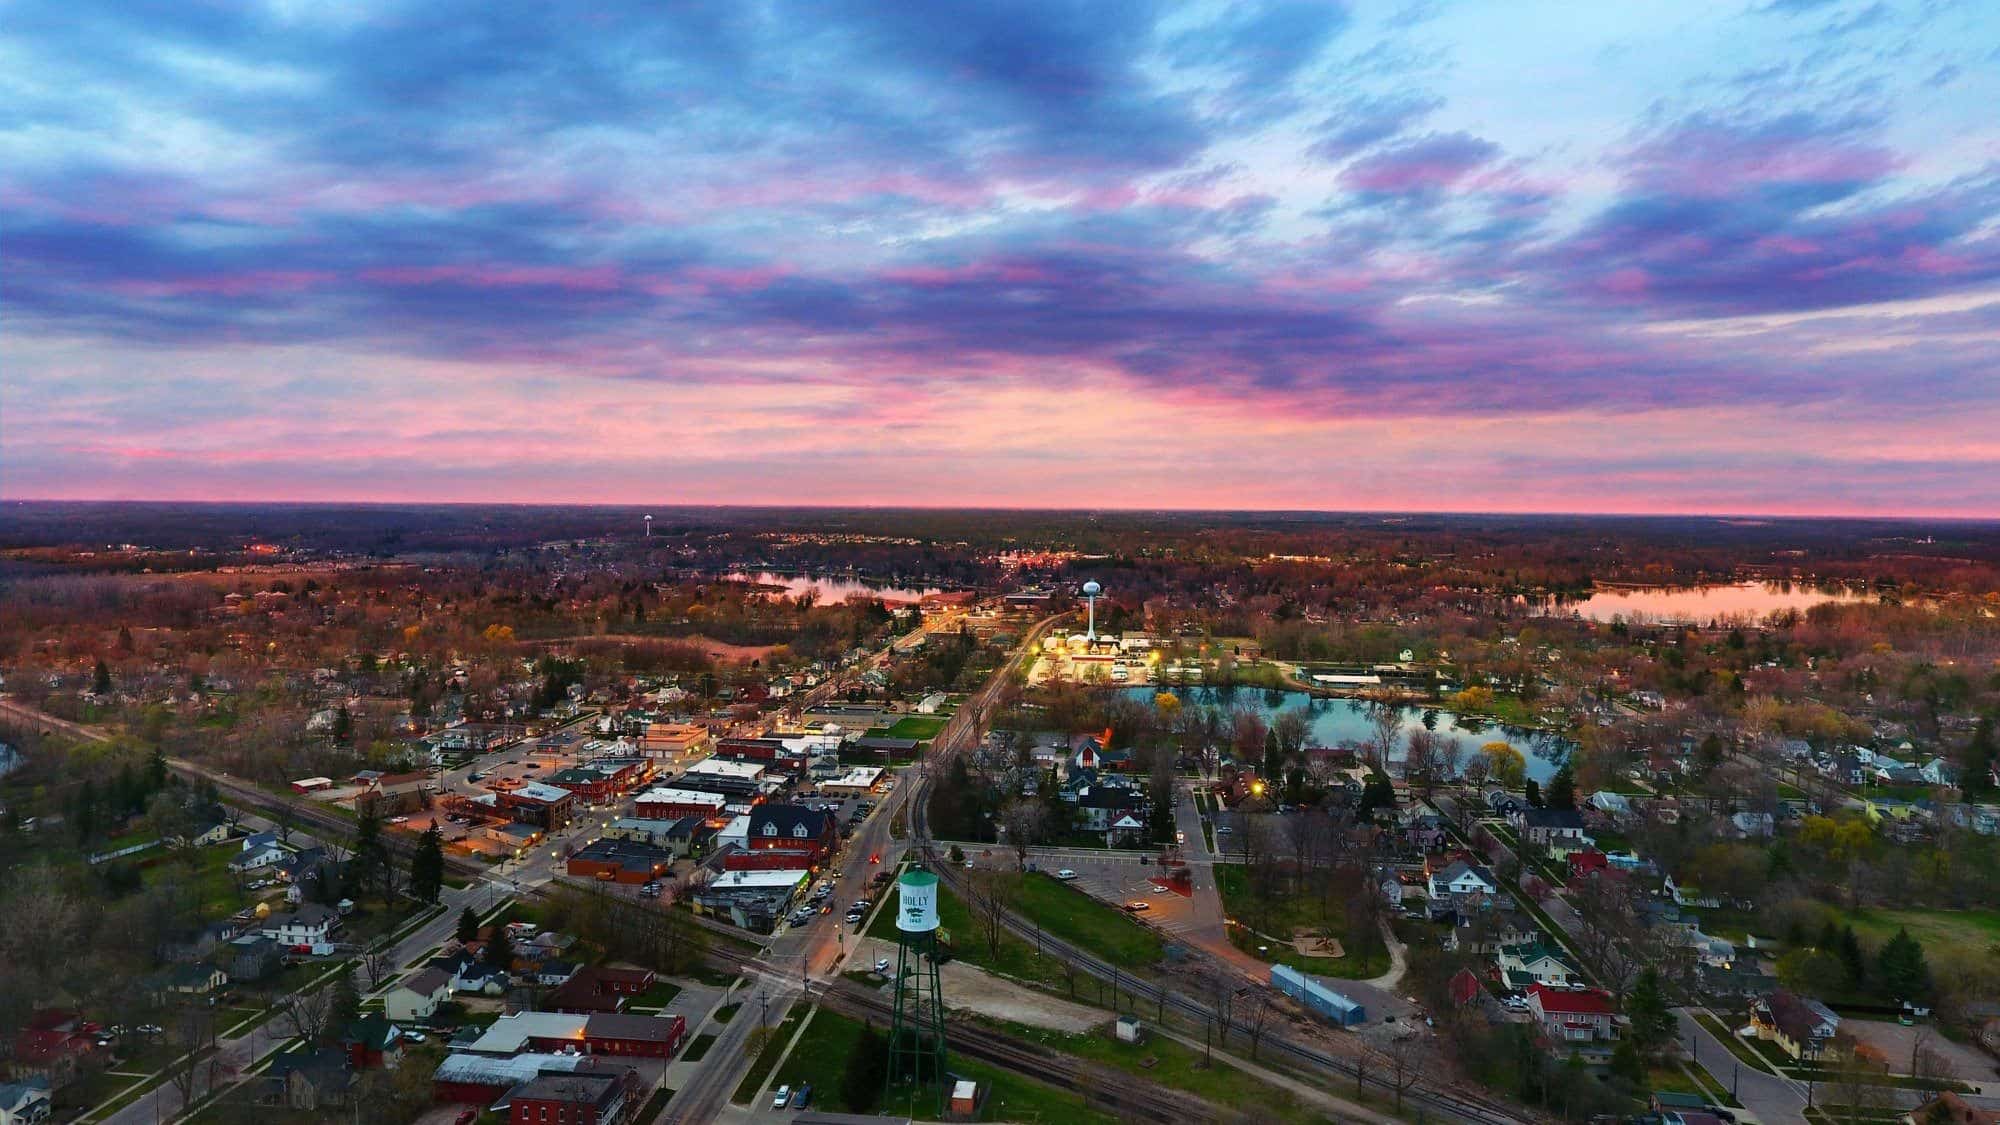 Local Photographer used his drone to catch this beautiful sunset over Holly